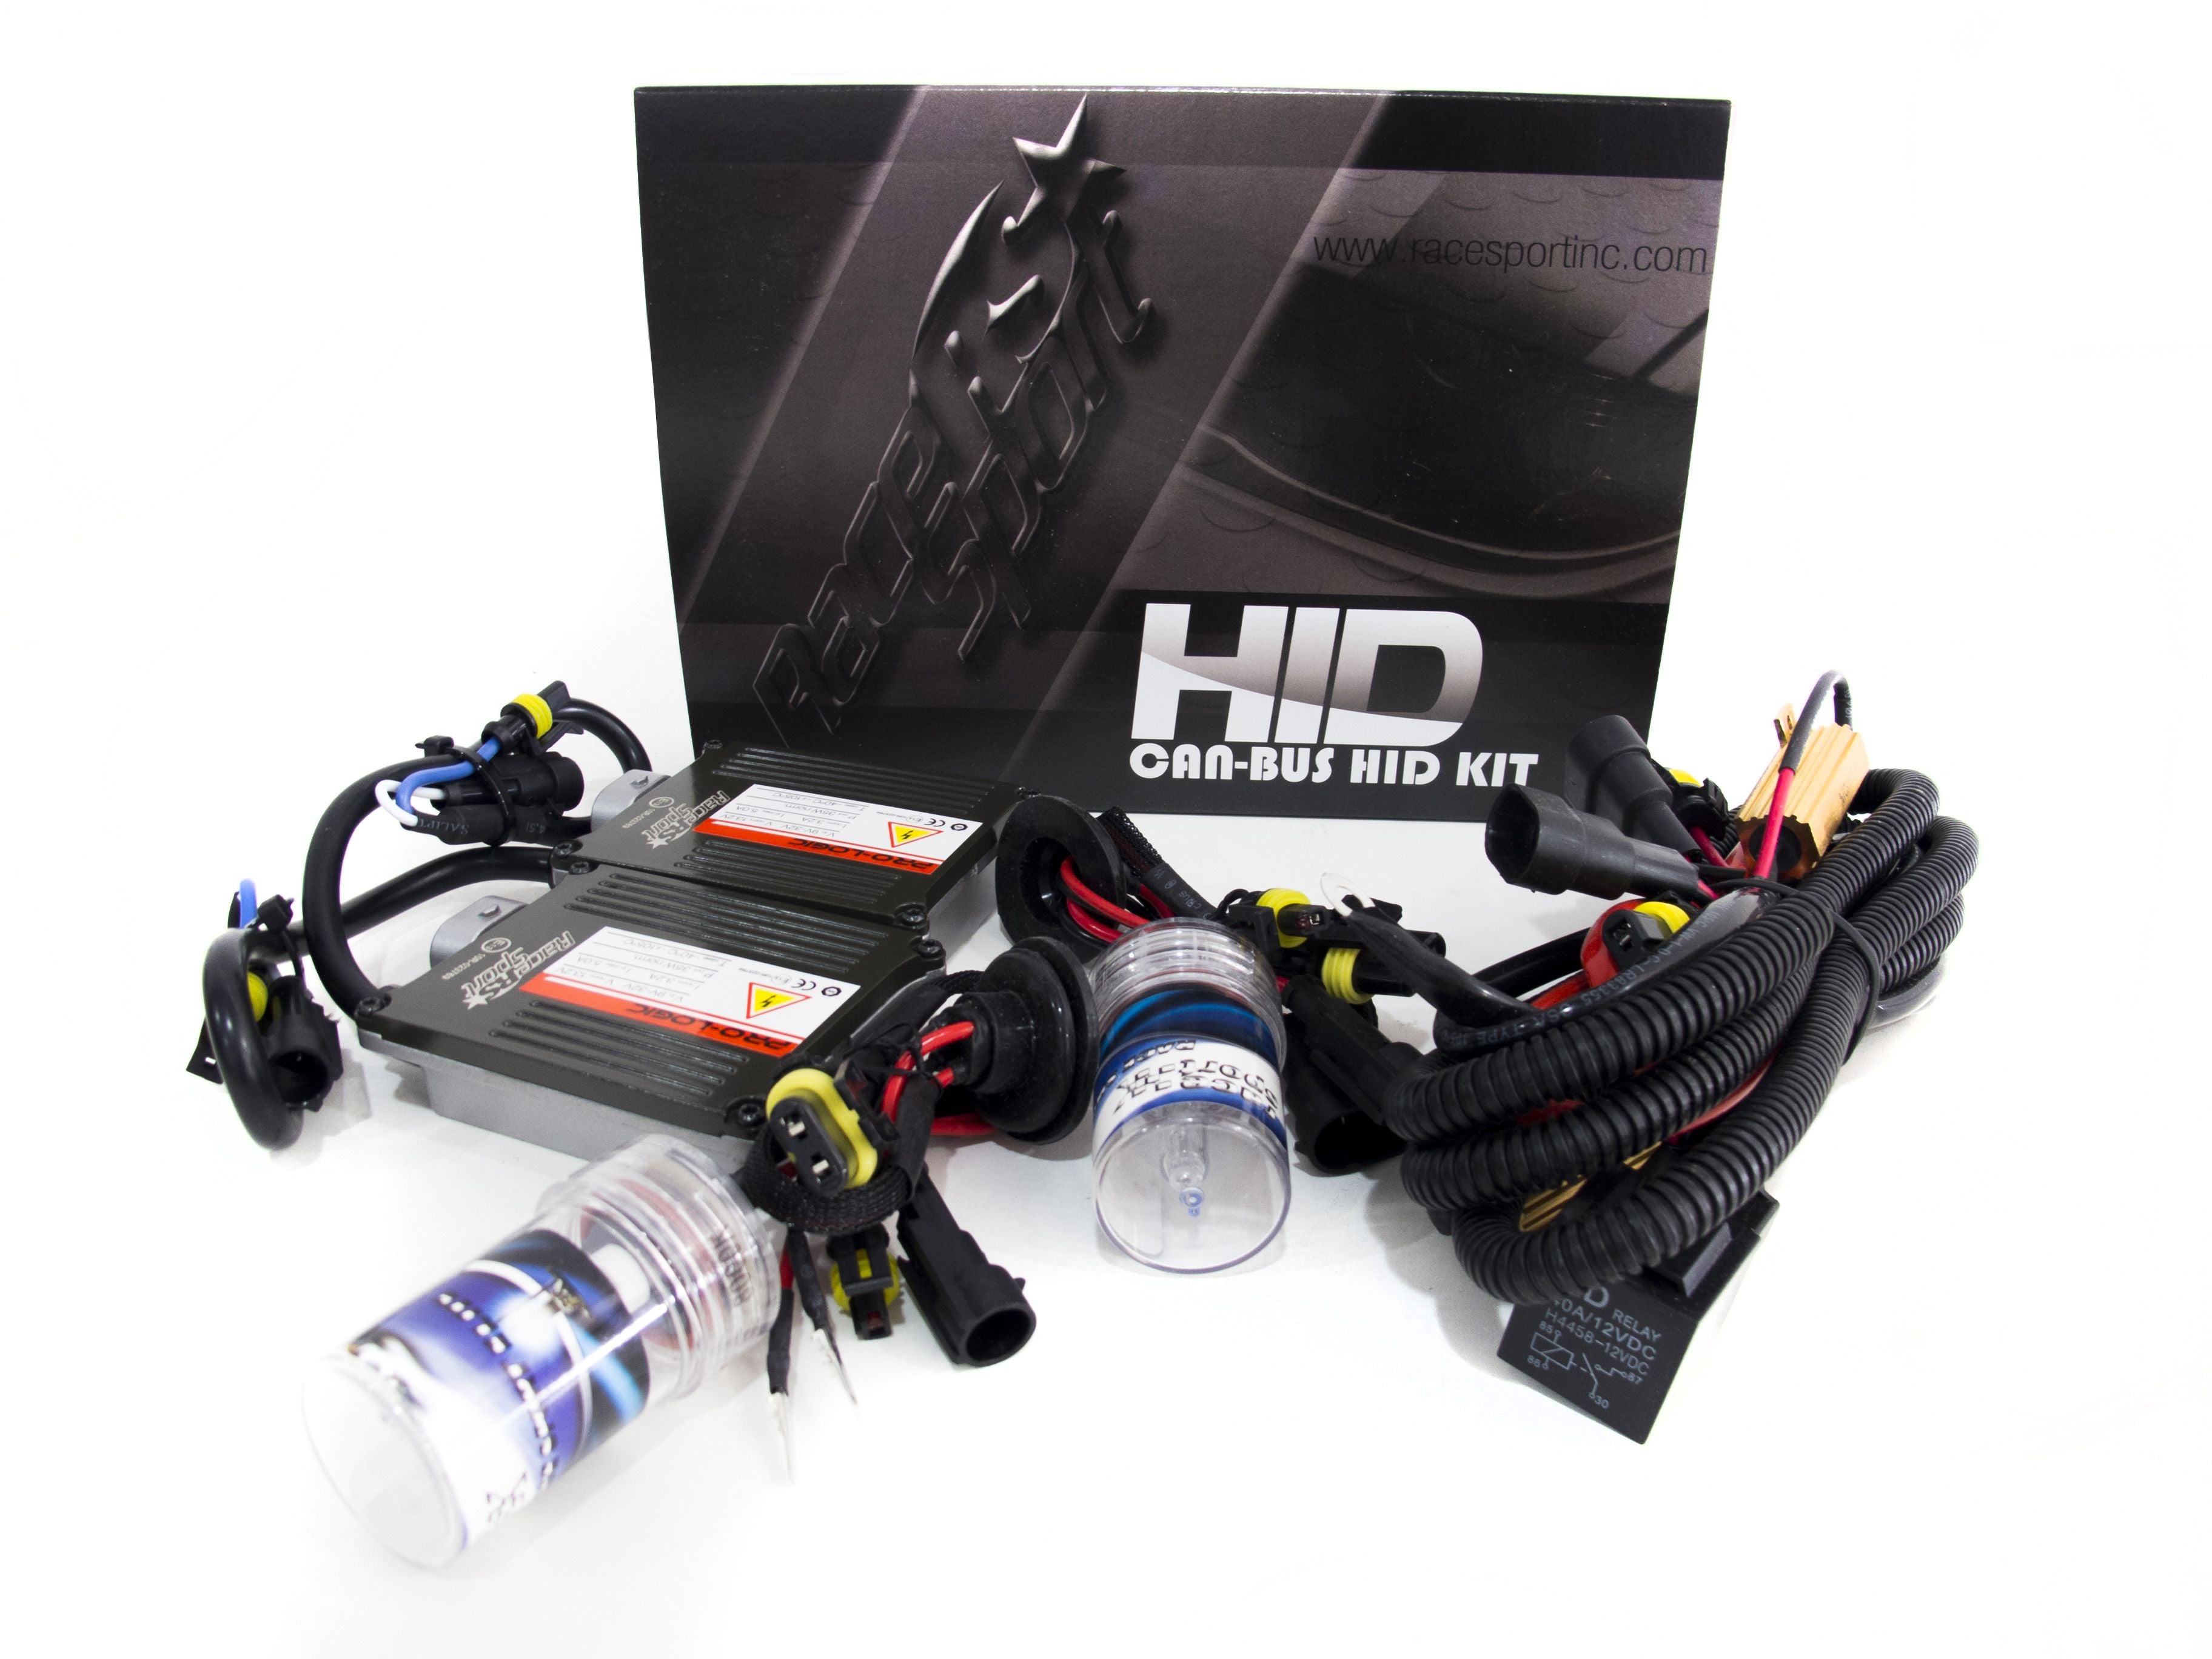 Race Sport H3 GEN 1 Canbus HID Mid-Slim Ballast Kit with Relay Resistor Harness H3-12K-G1-CANBUS-R